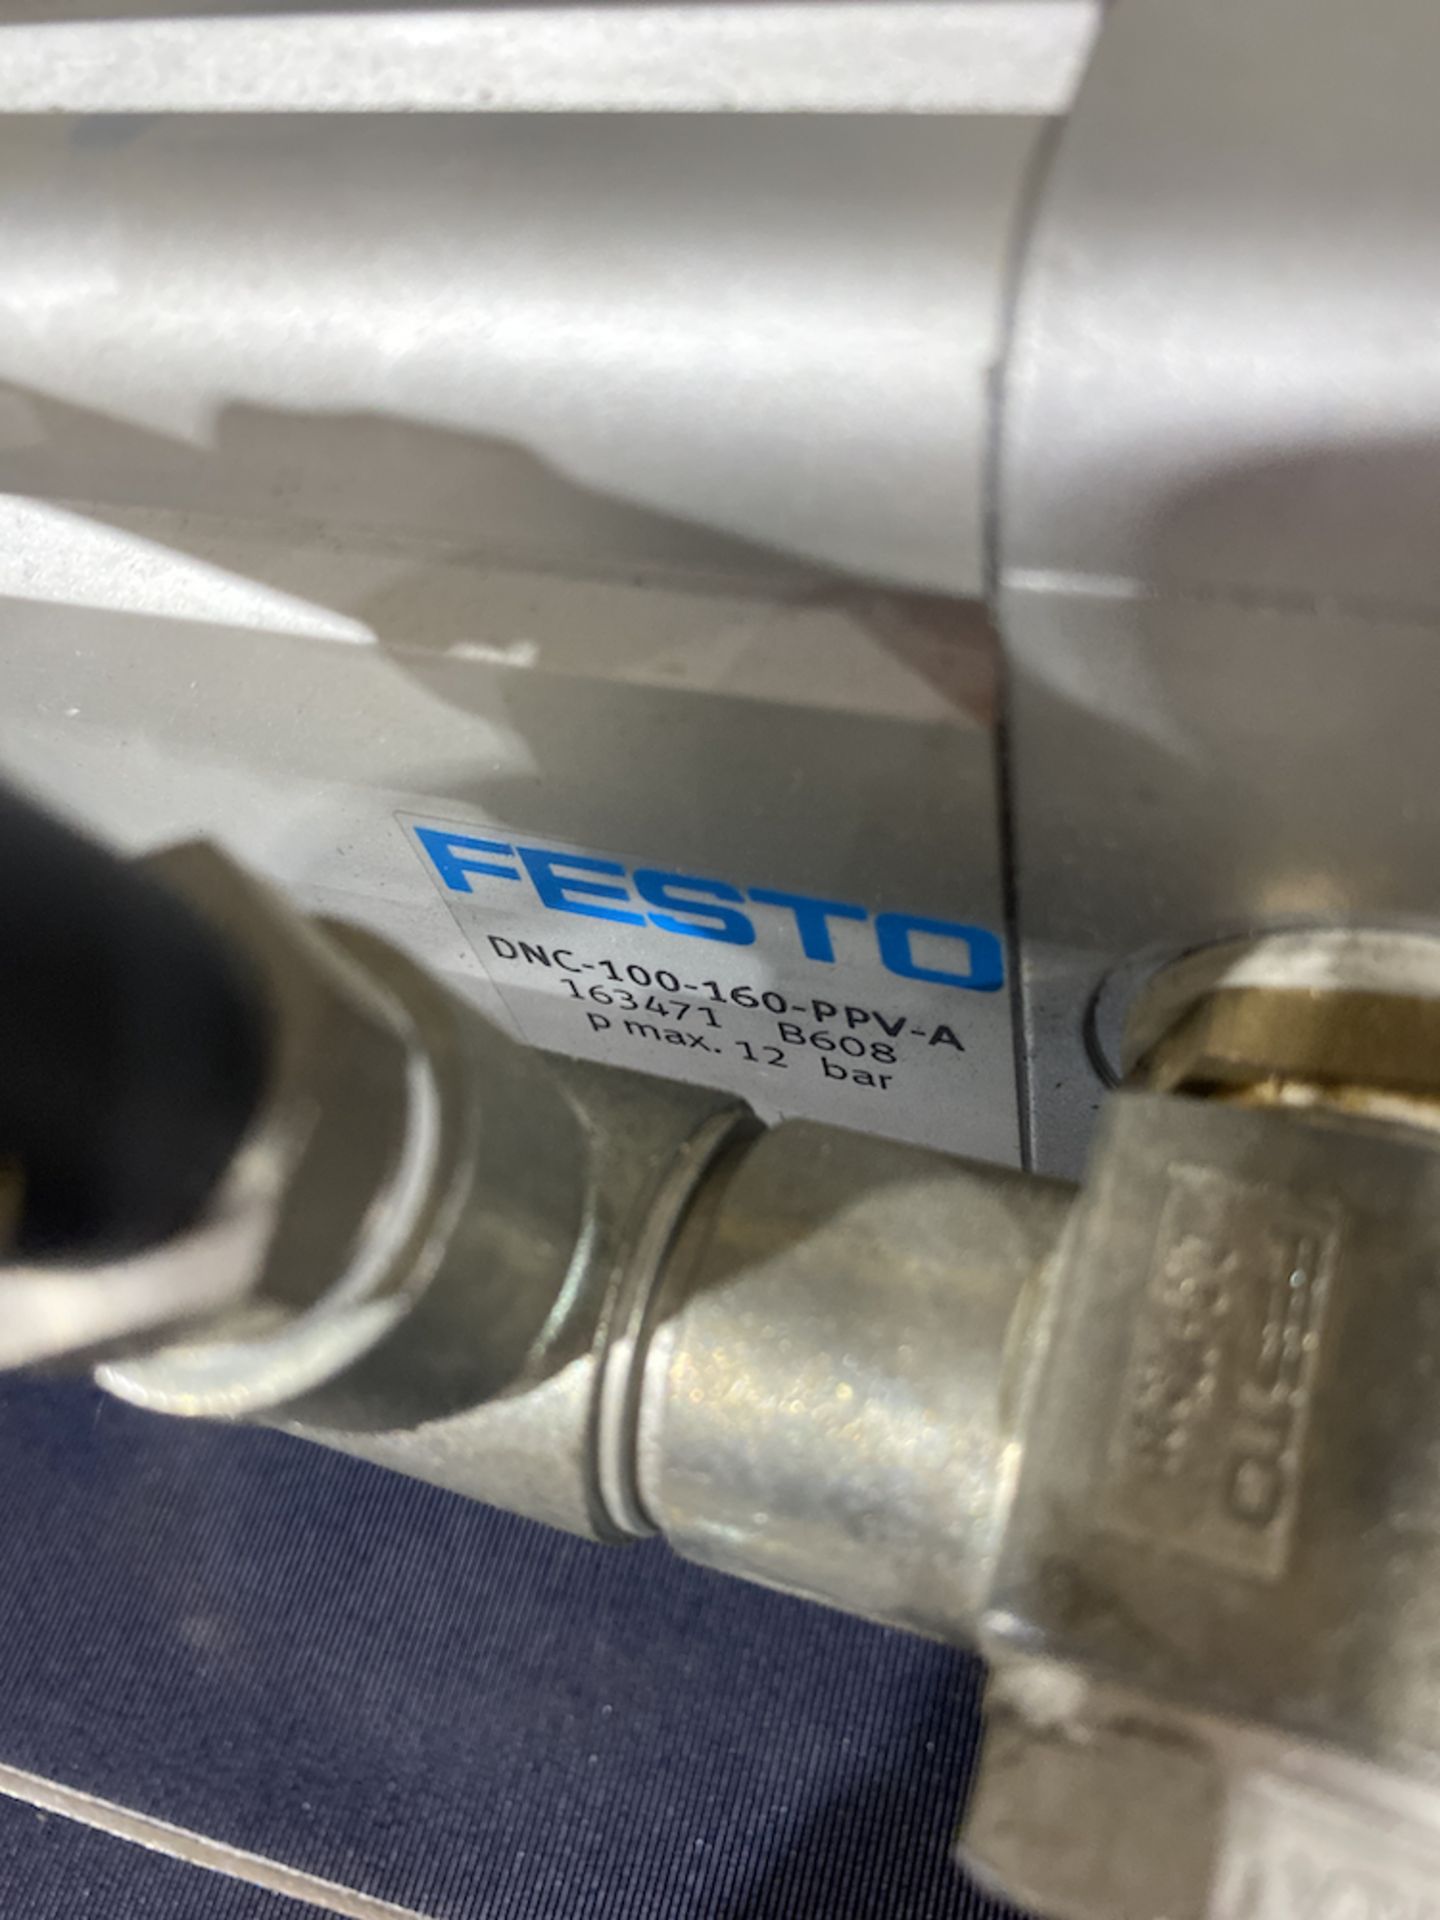 FESTO DNC-100-160-PPV-A PNEUMATIC CYLINDER - Image 2 of 5